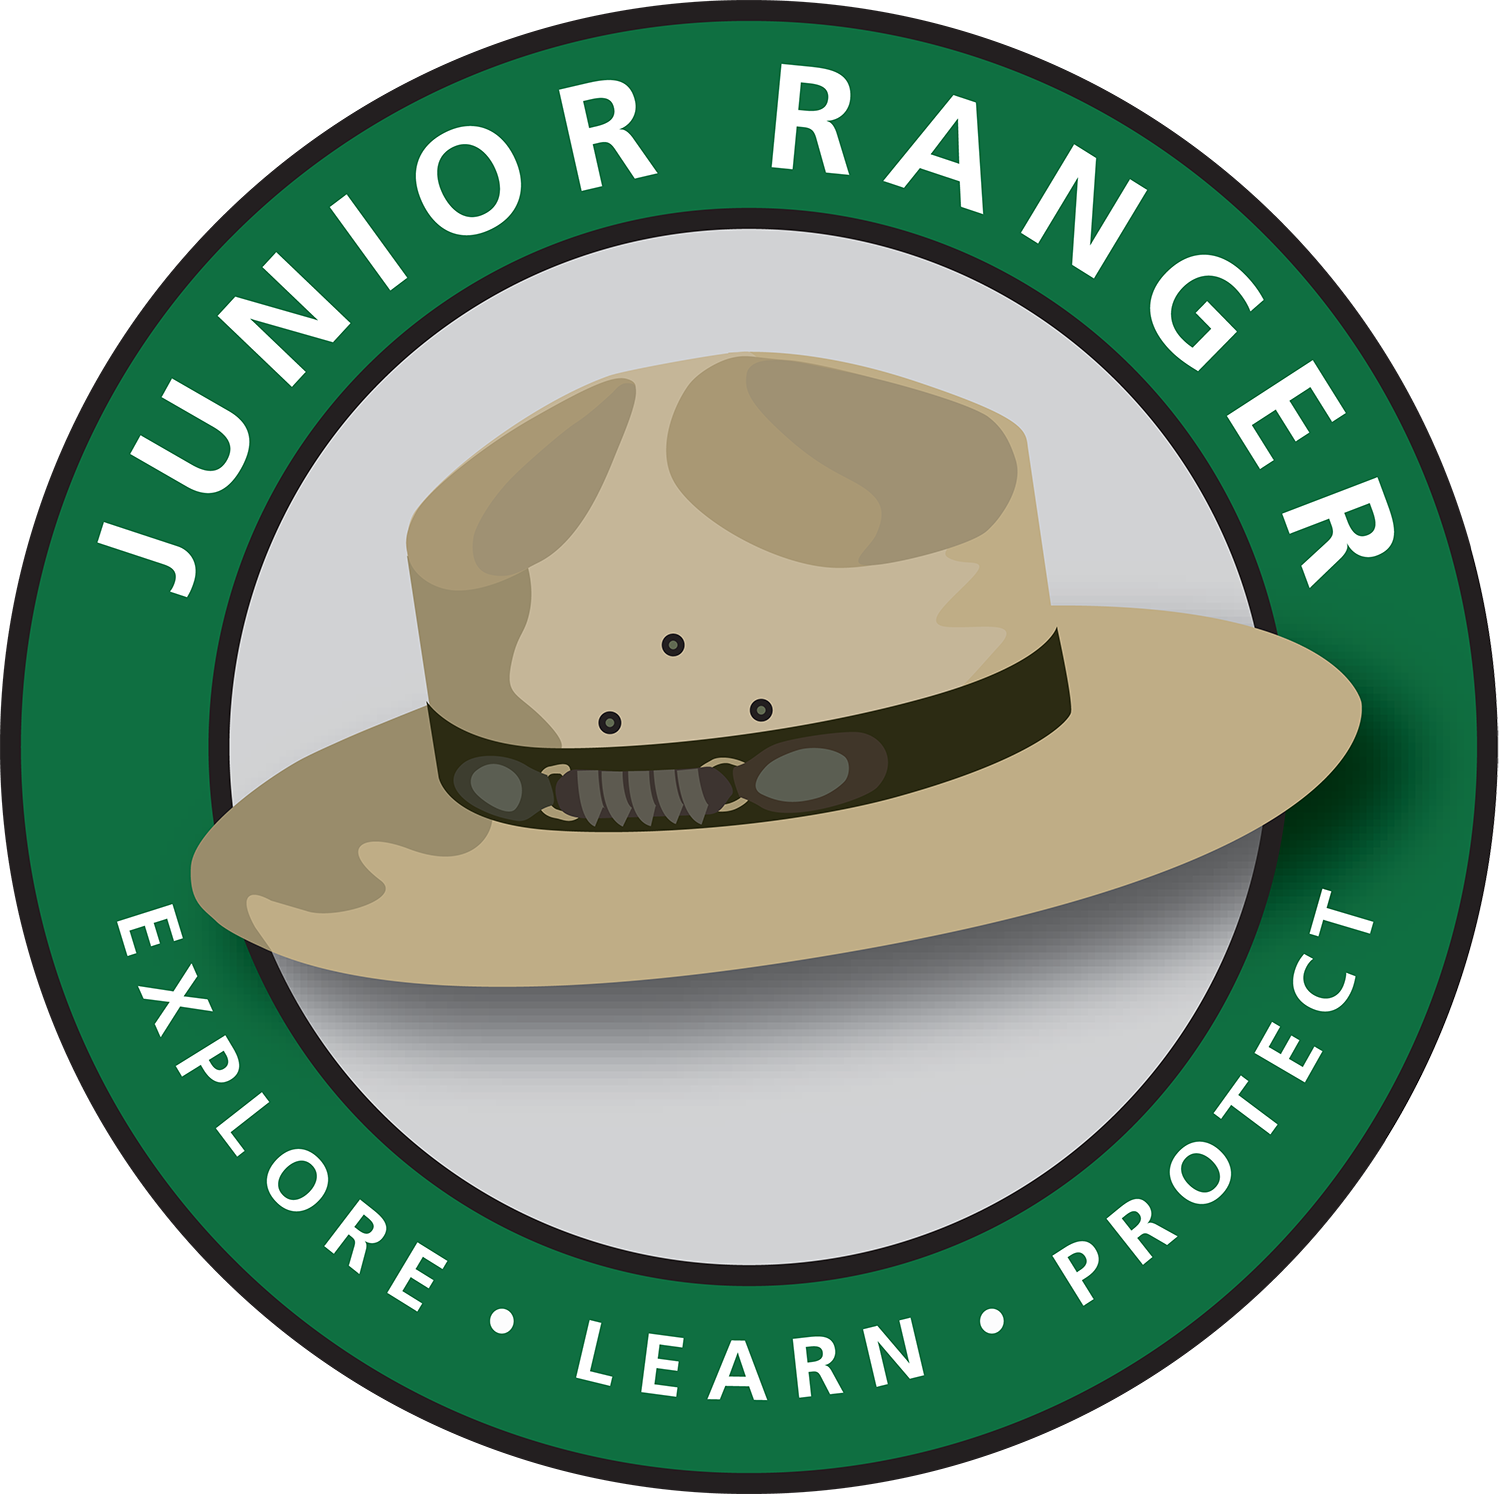 Logo in color with motto; learn, explore, protect